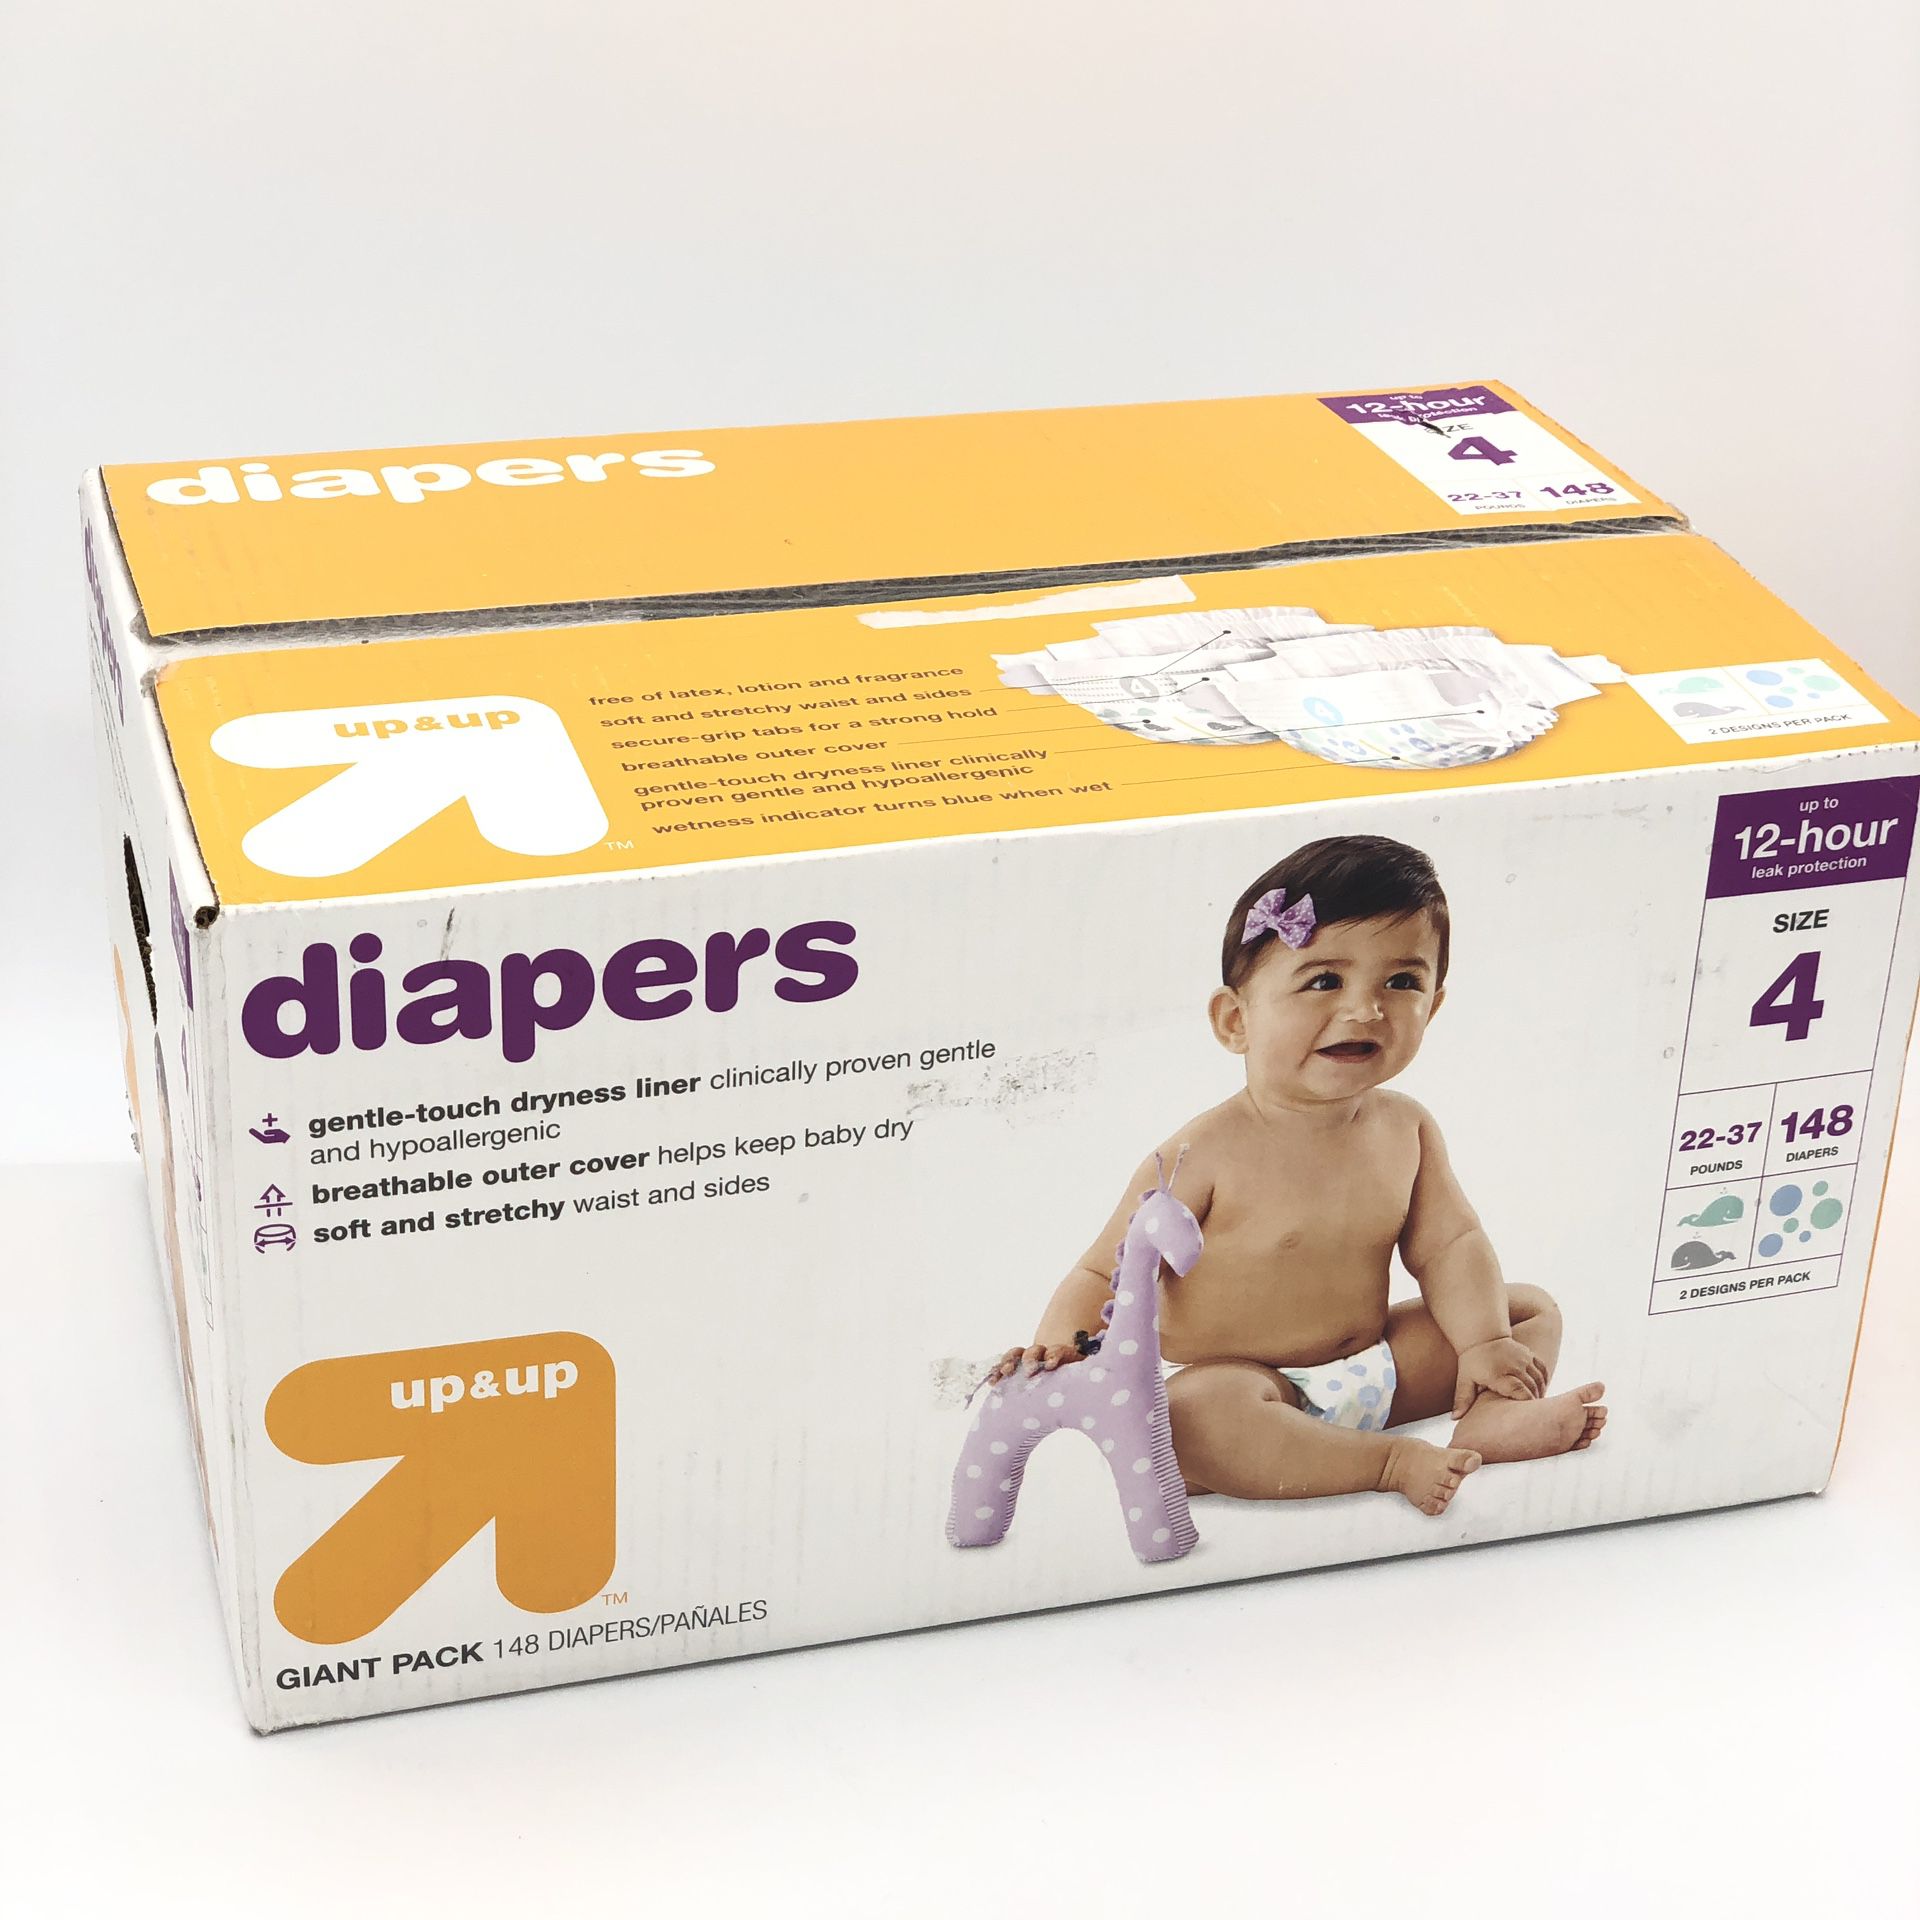 Up & Up Baby Diapers Size 4 (148 Count) Giant Pack